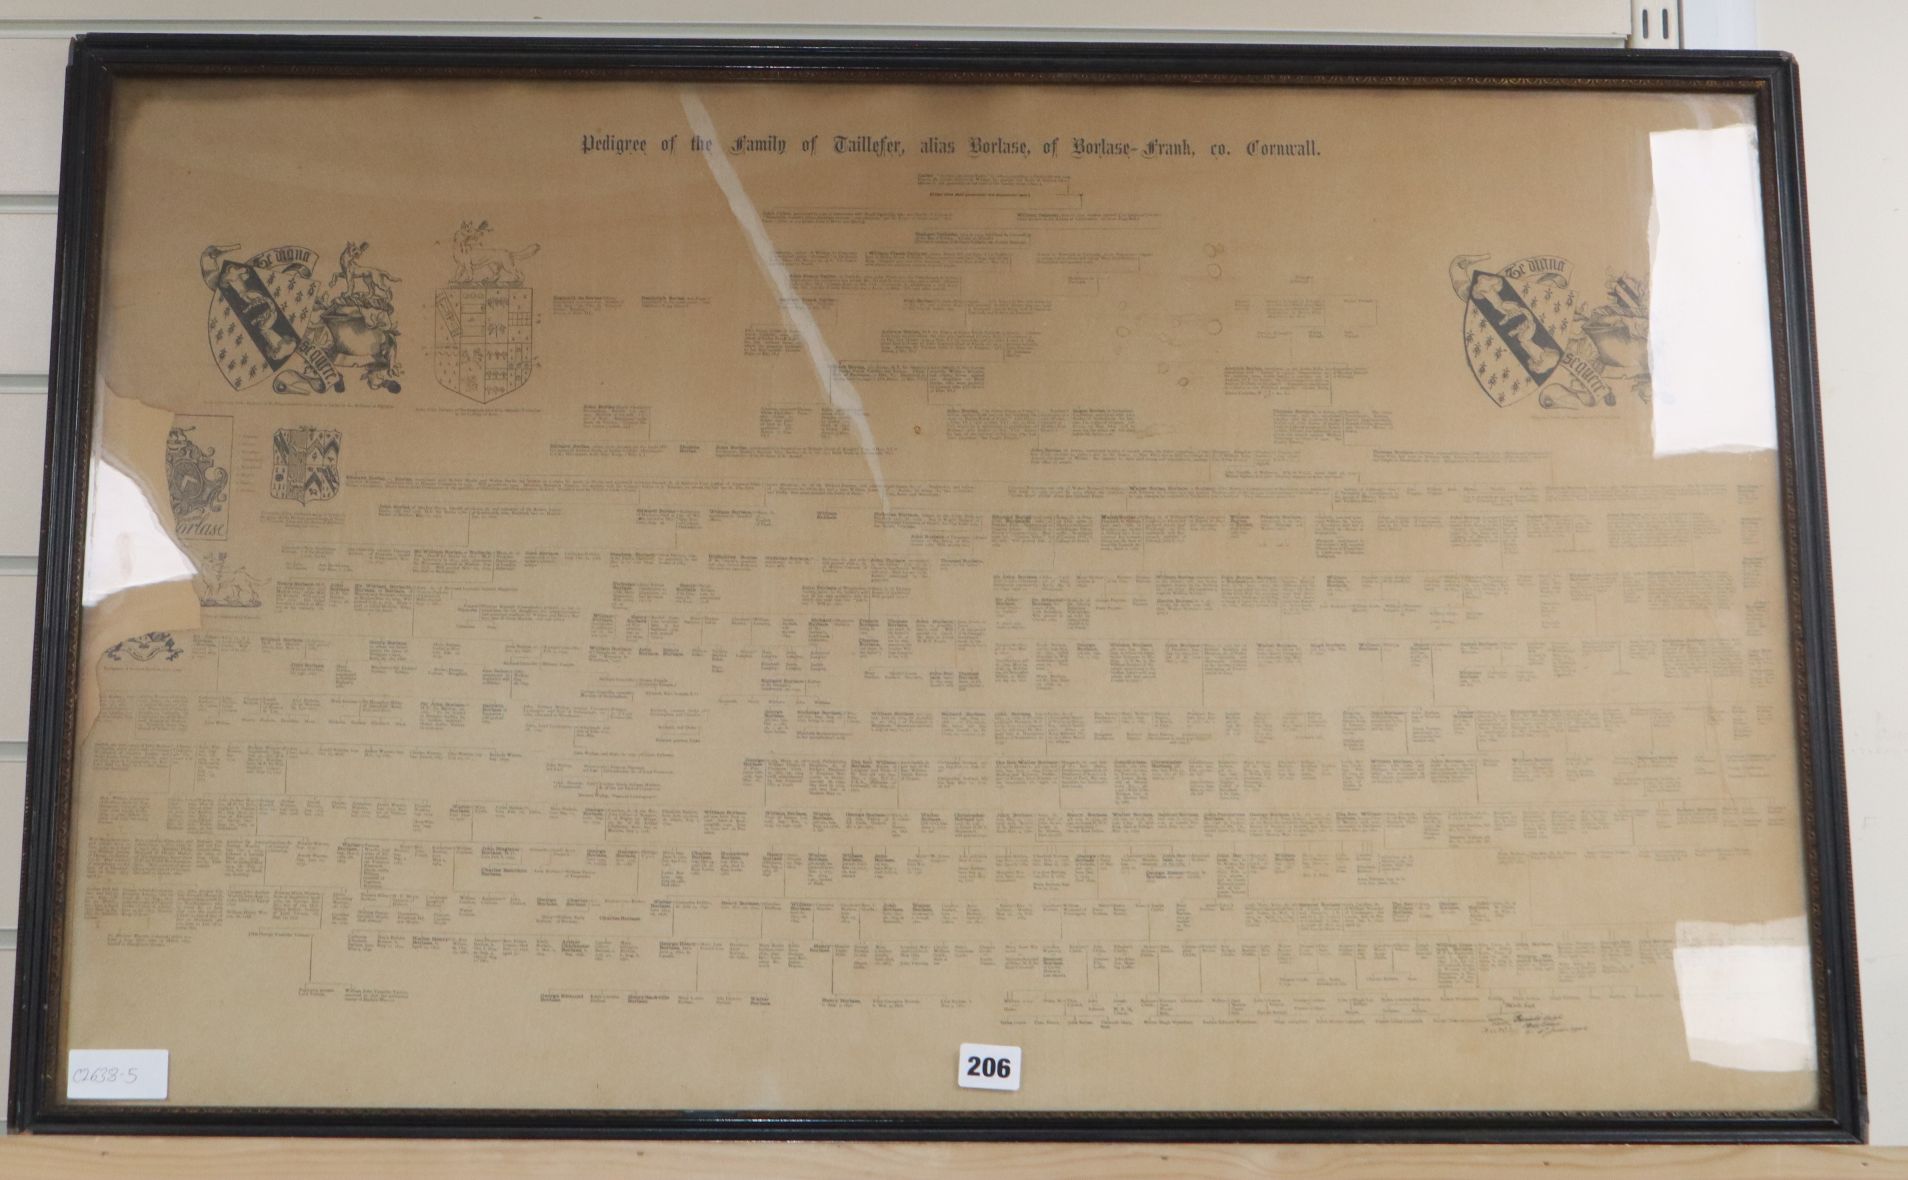 A framed copy of the Taillefer family tree